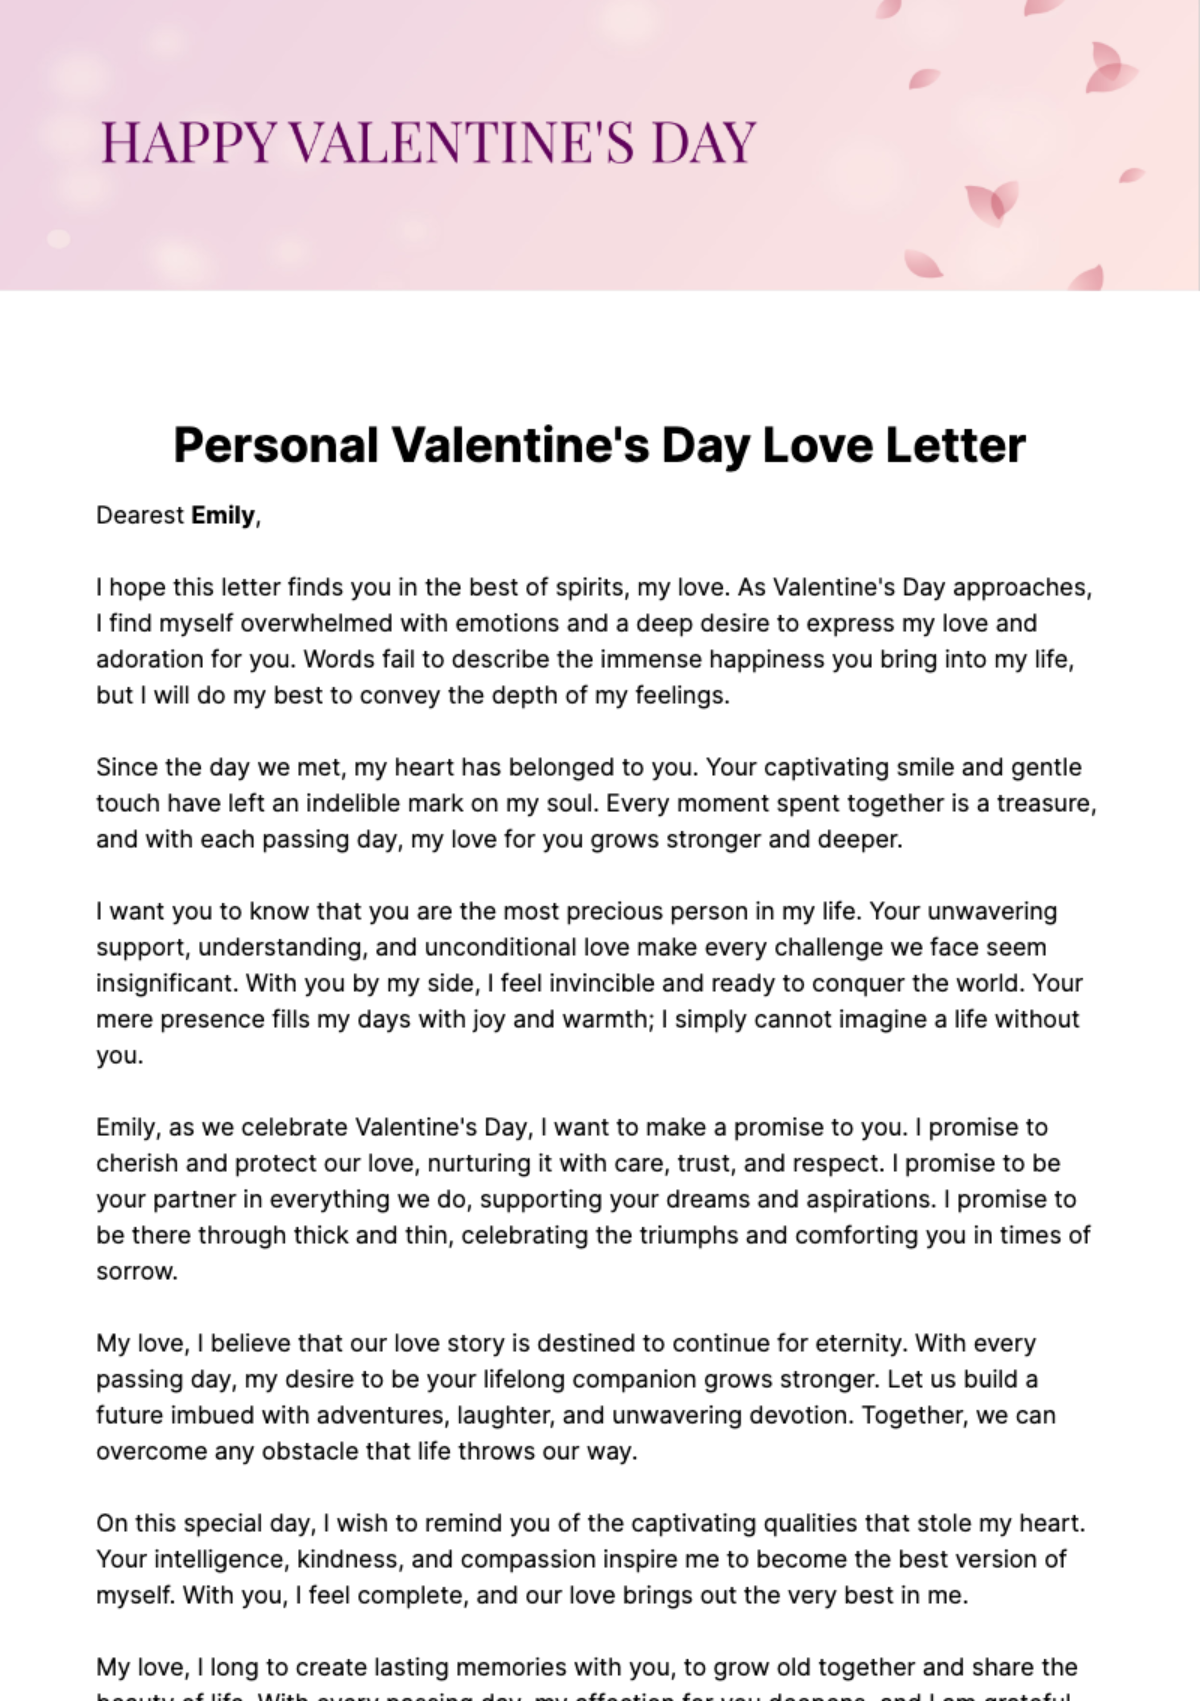 Personal Valentine's Day Love Letter Template